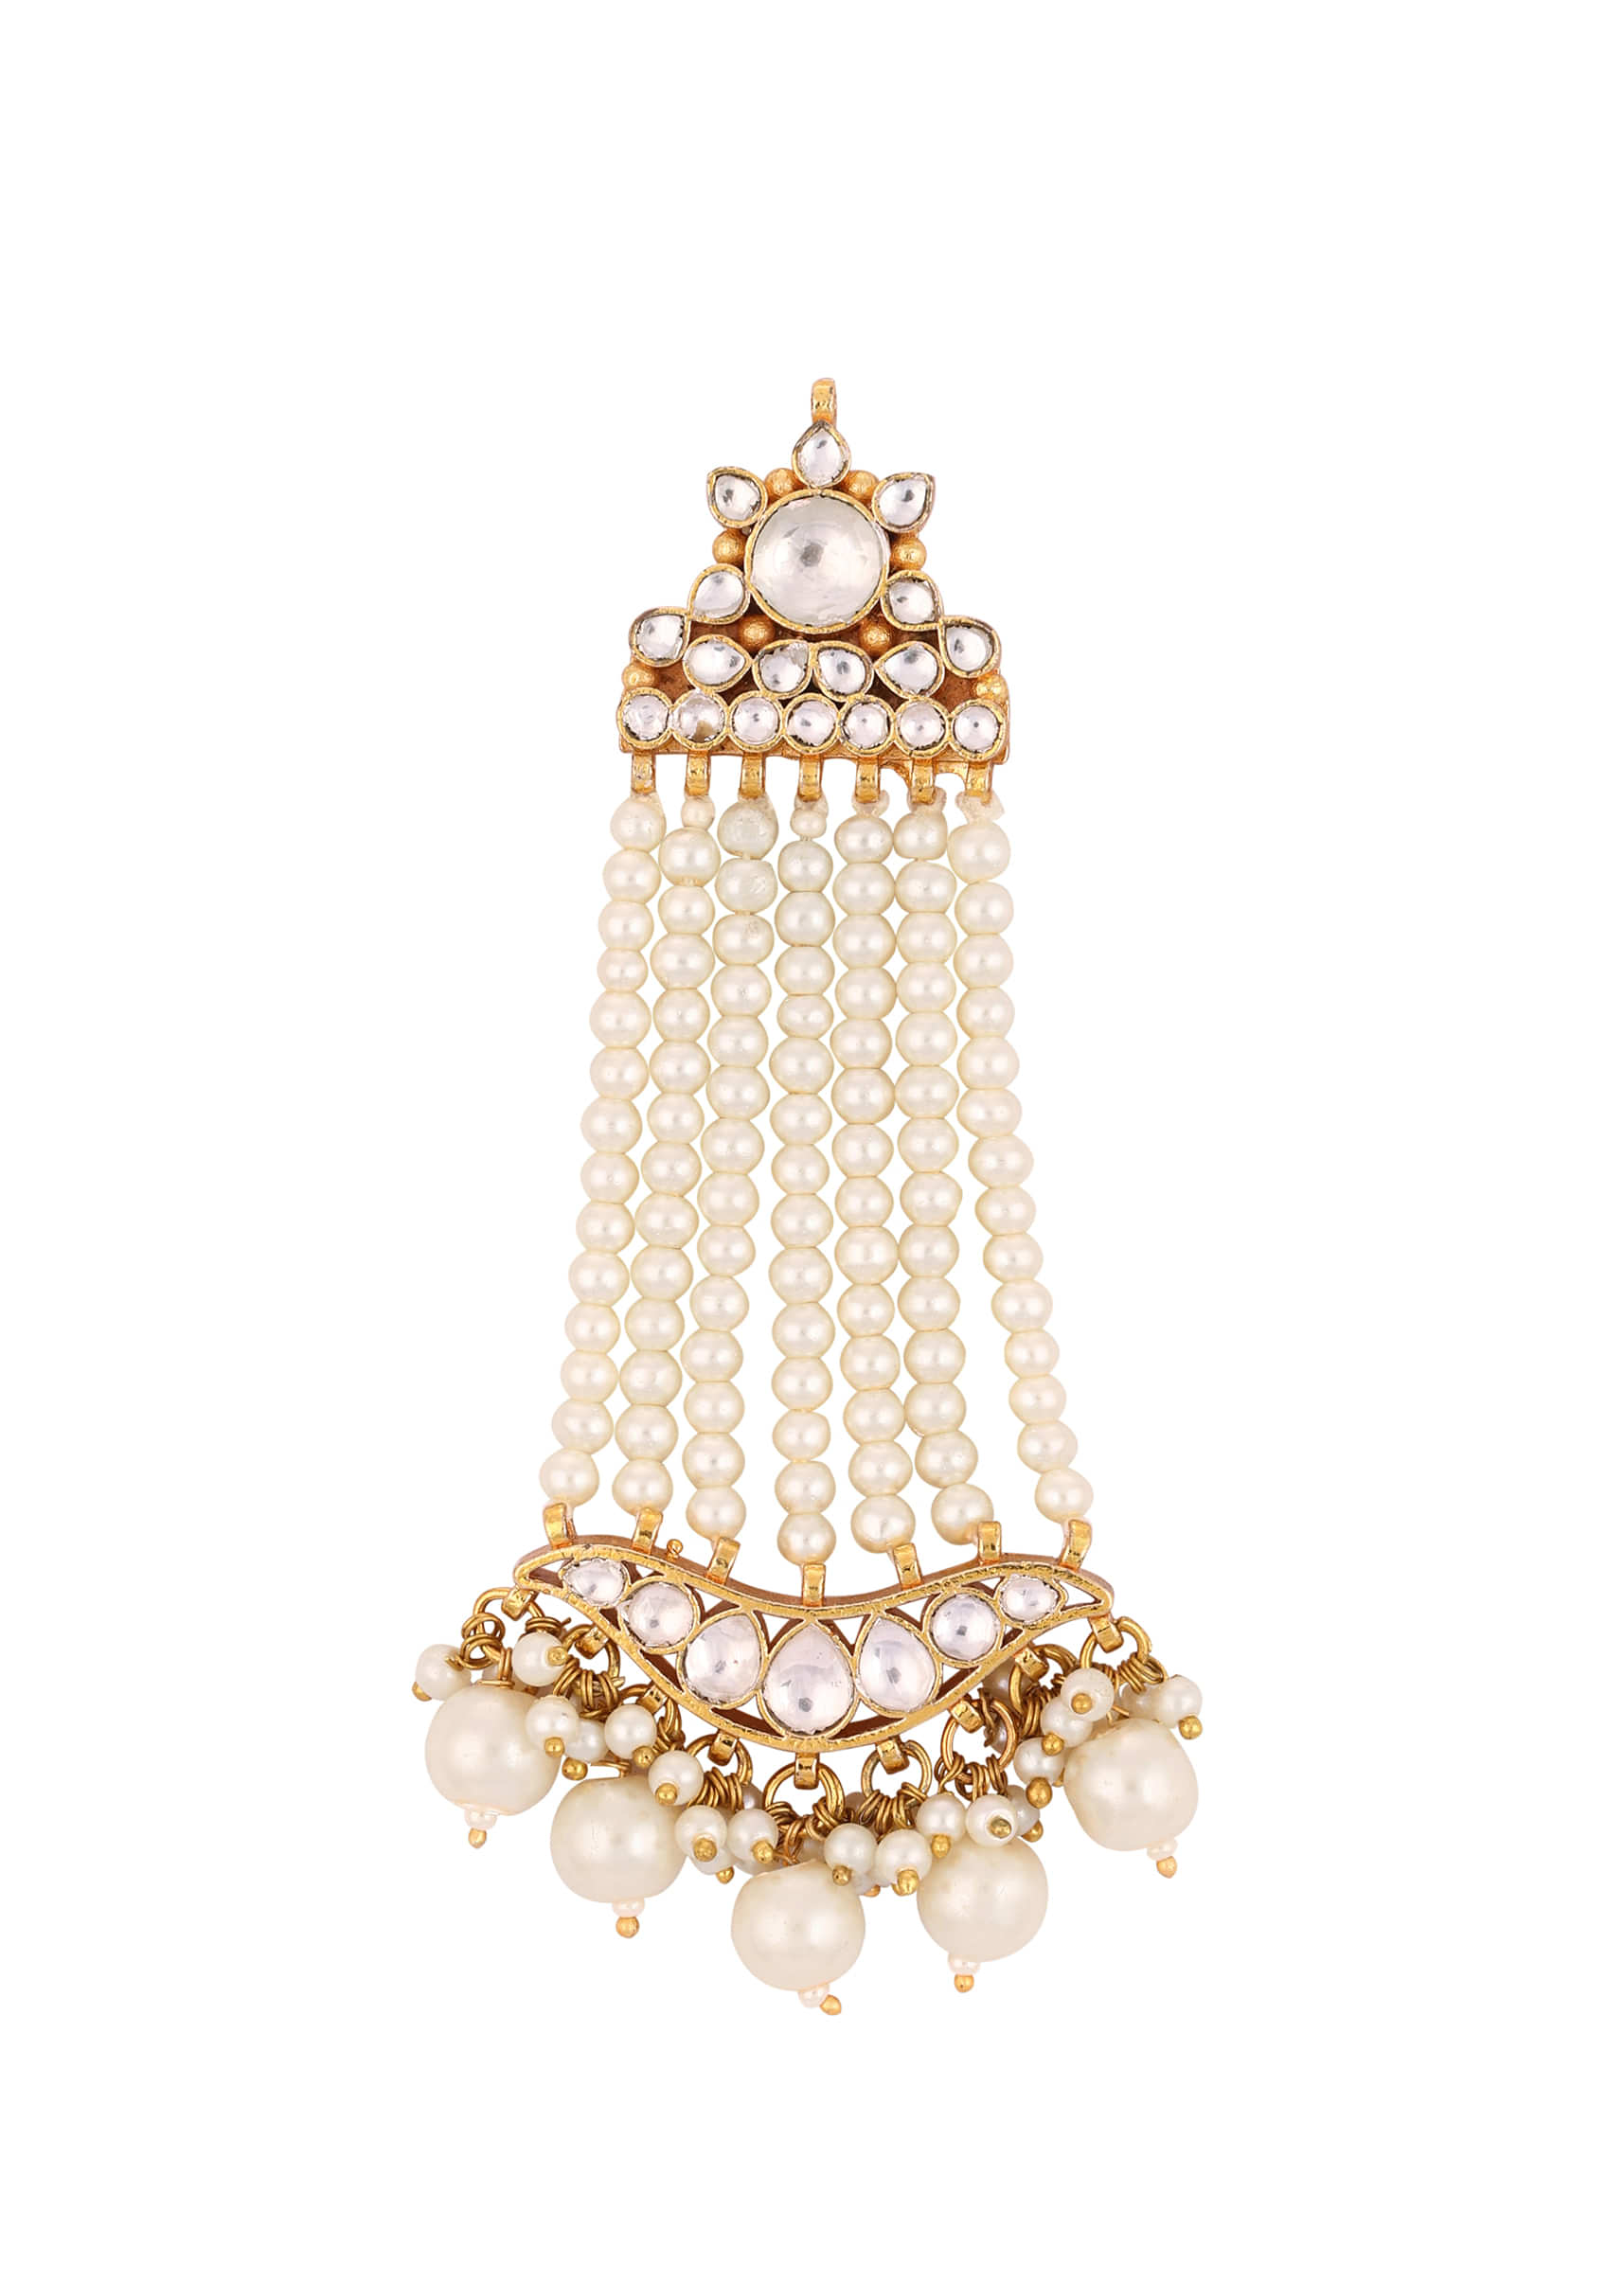 Gold Finish Kundan Polki Earrings With Beads And Pearls